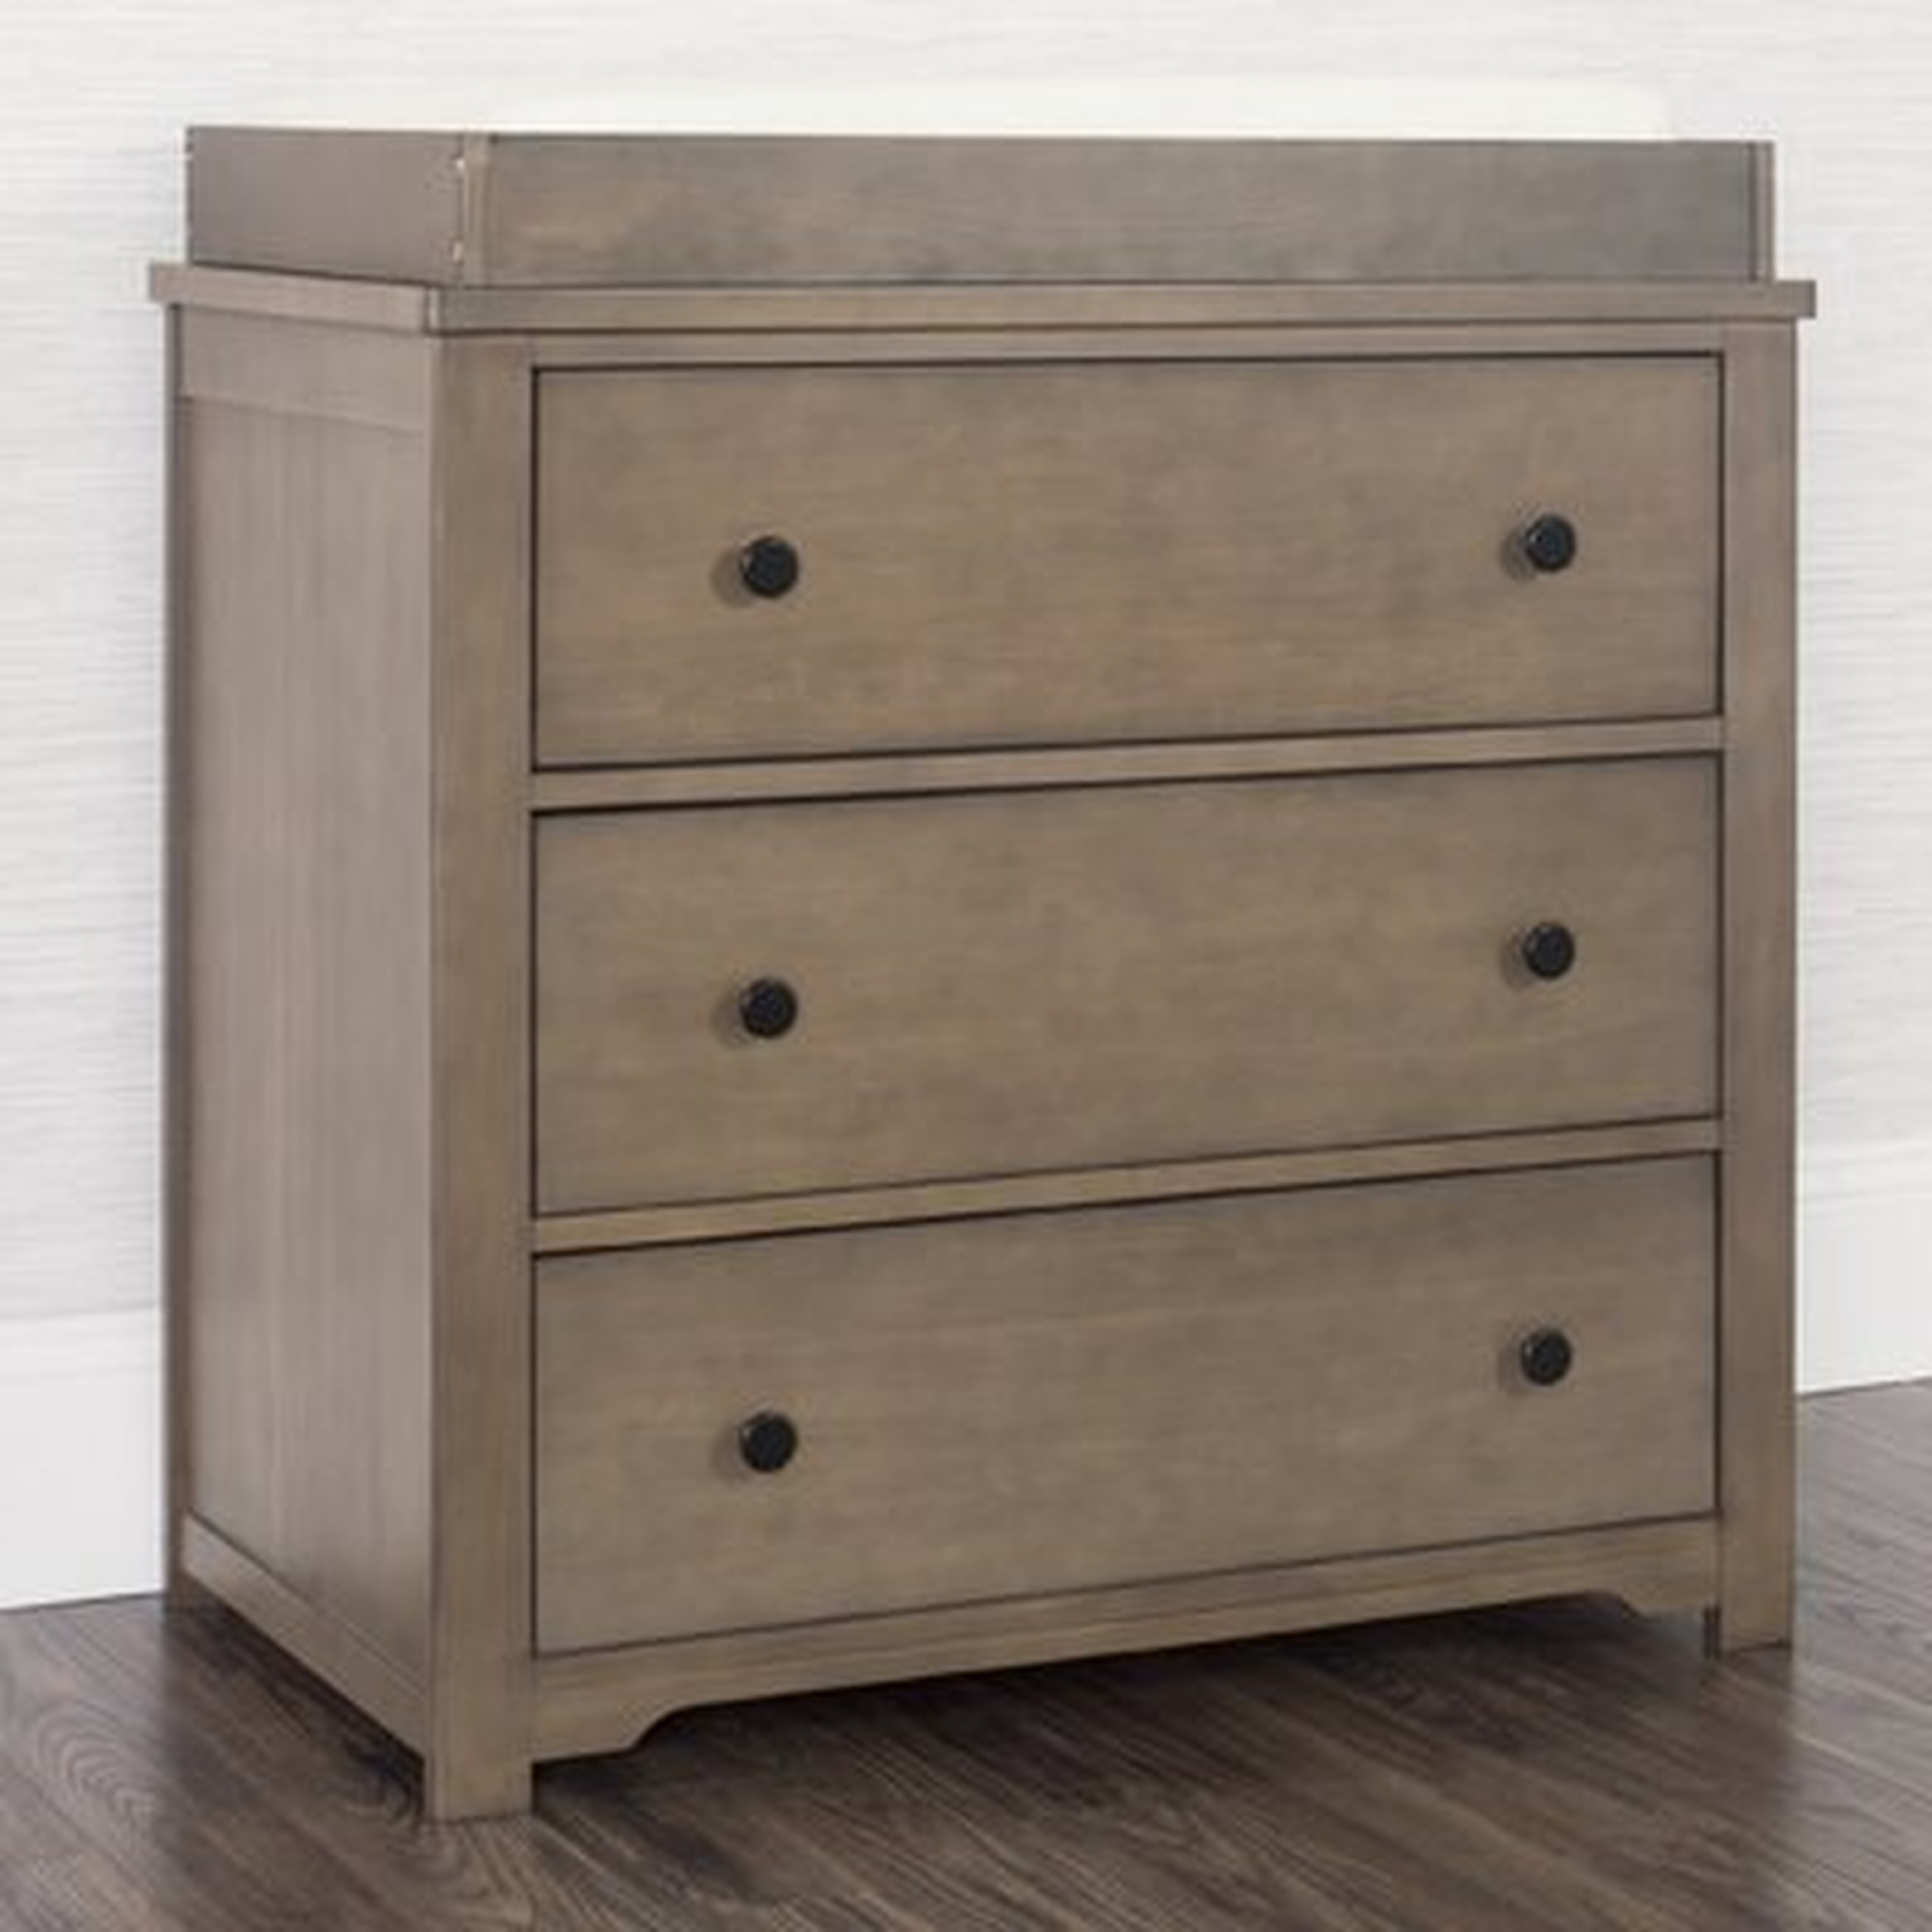 Forever Eclectic 3-drawer Dresser With Changing Table Topper, Neutral Brown - Wayfair